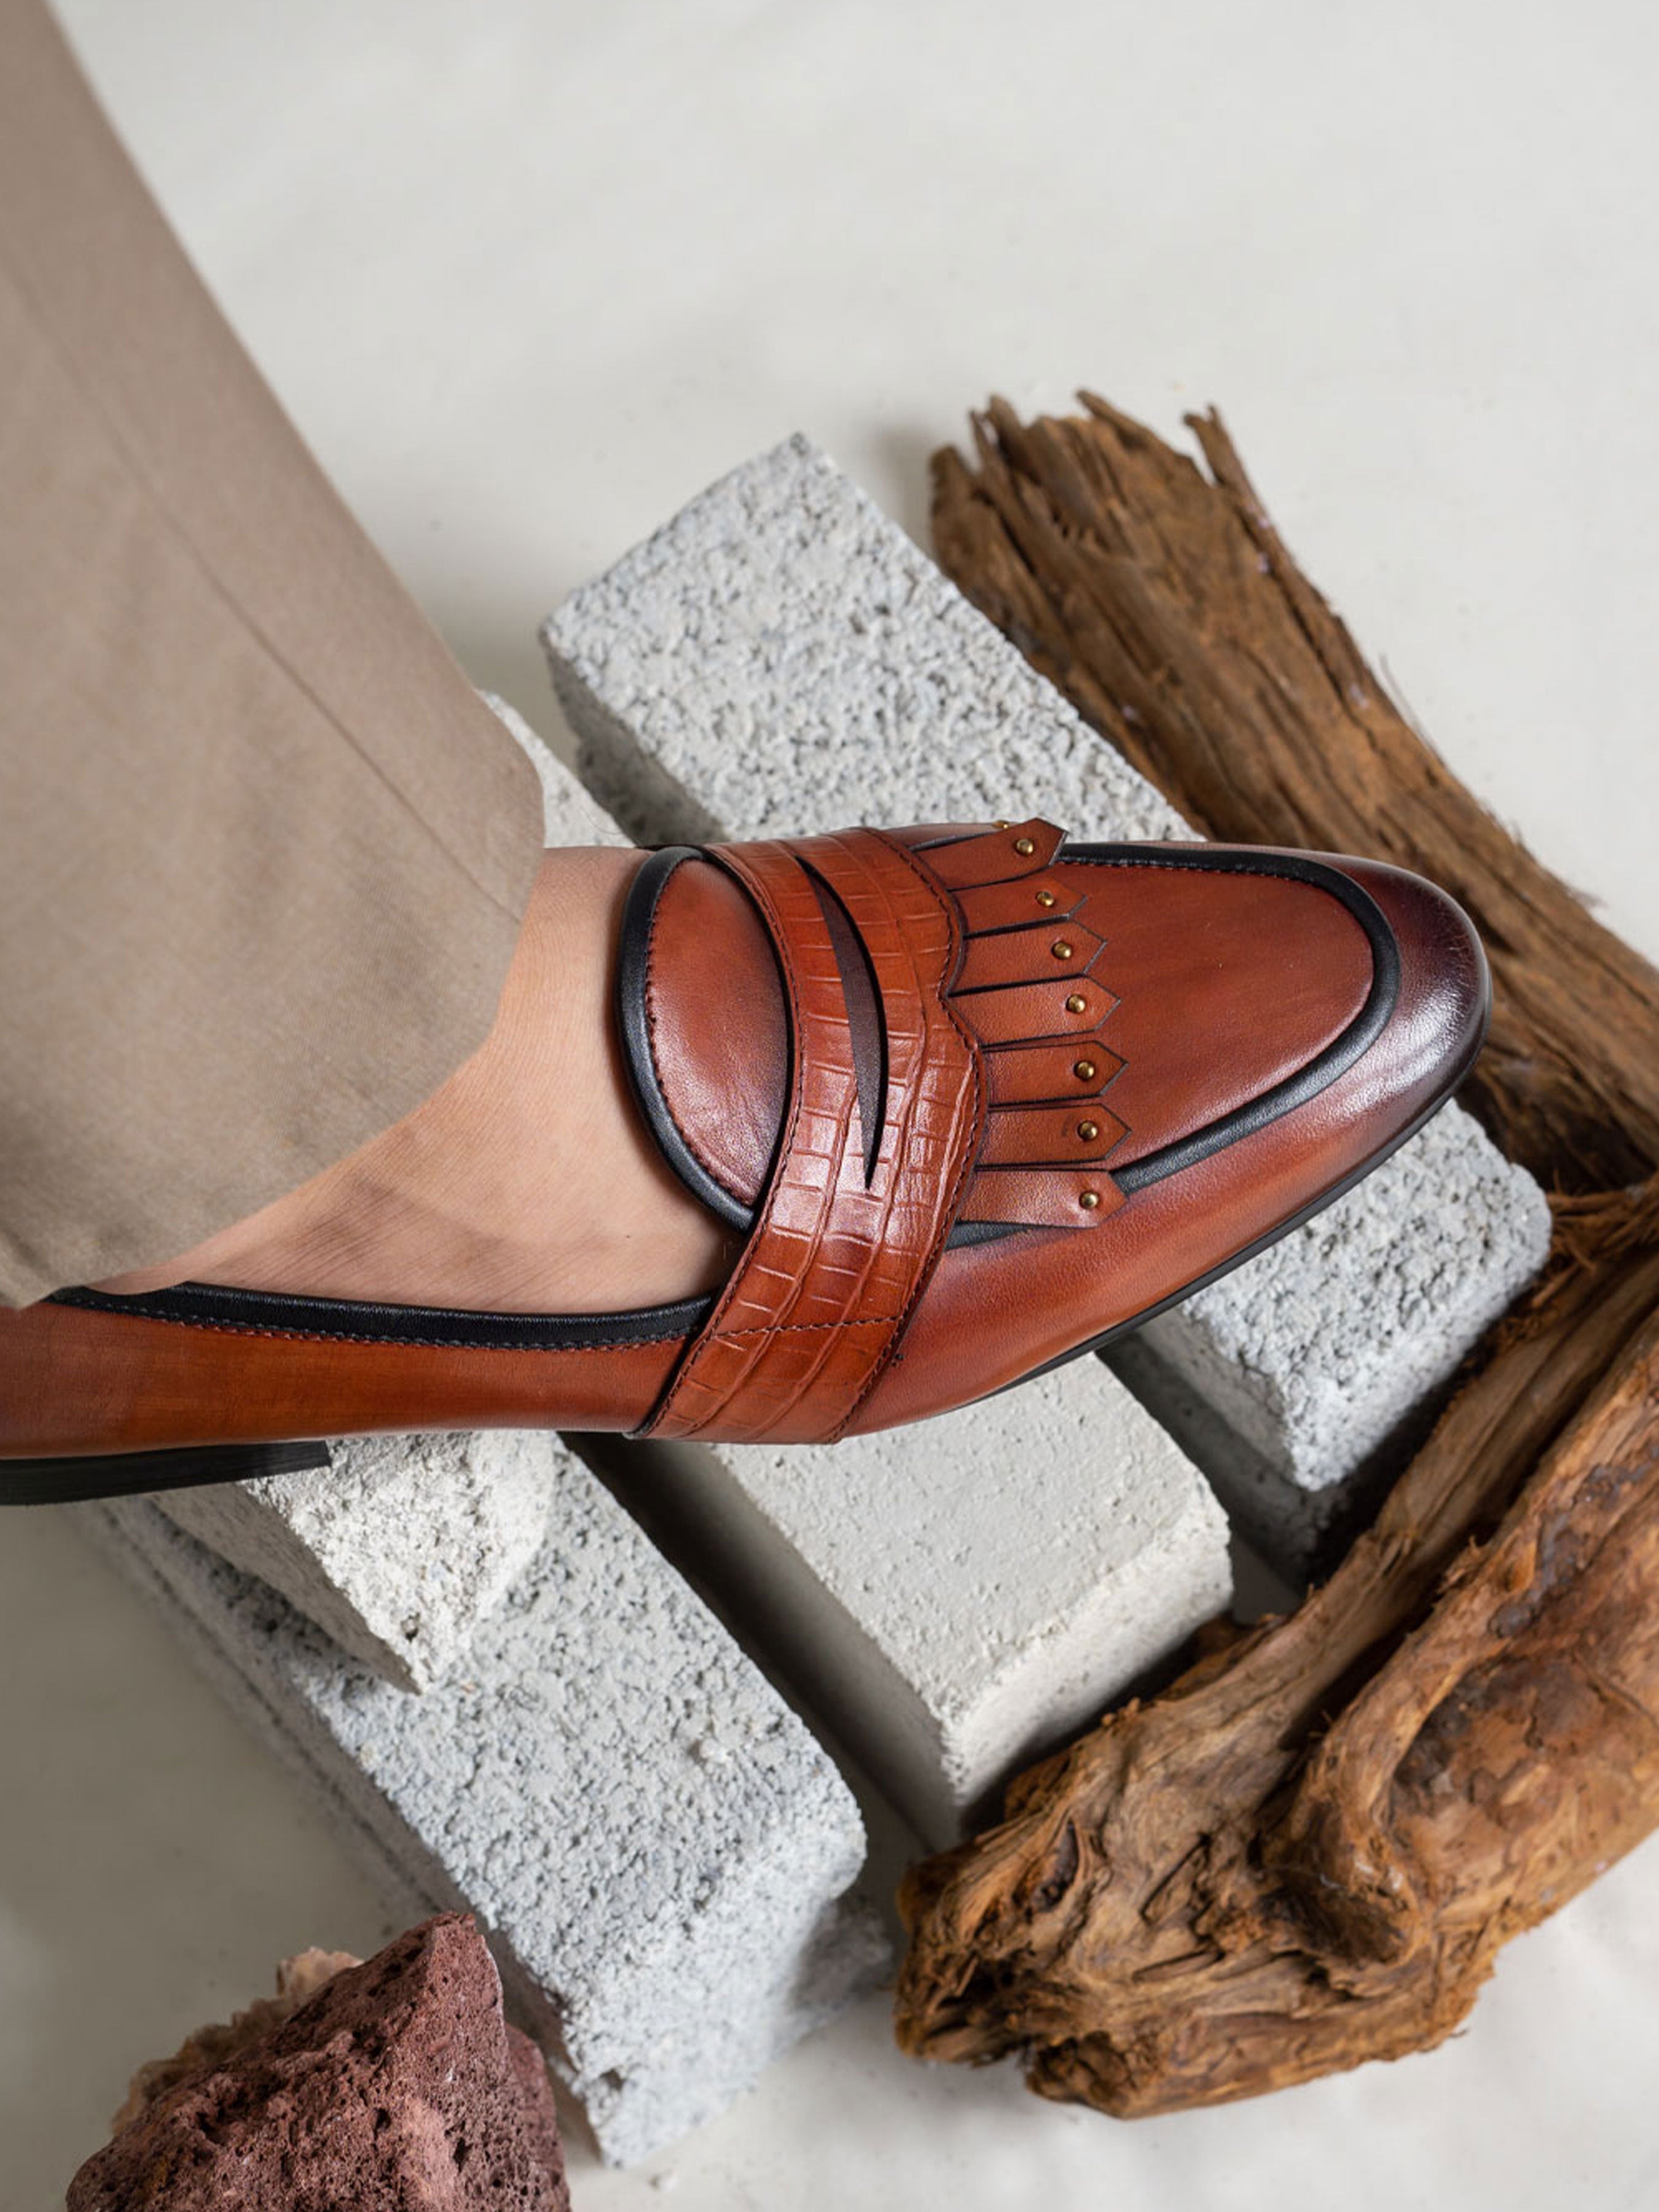 Belgian Loafer - Cognac Tan Phyton Penny Strap with Studded Fringe (Hand Painted Patina) - Zeve Shoes